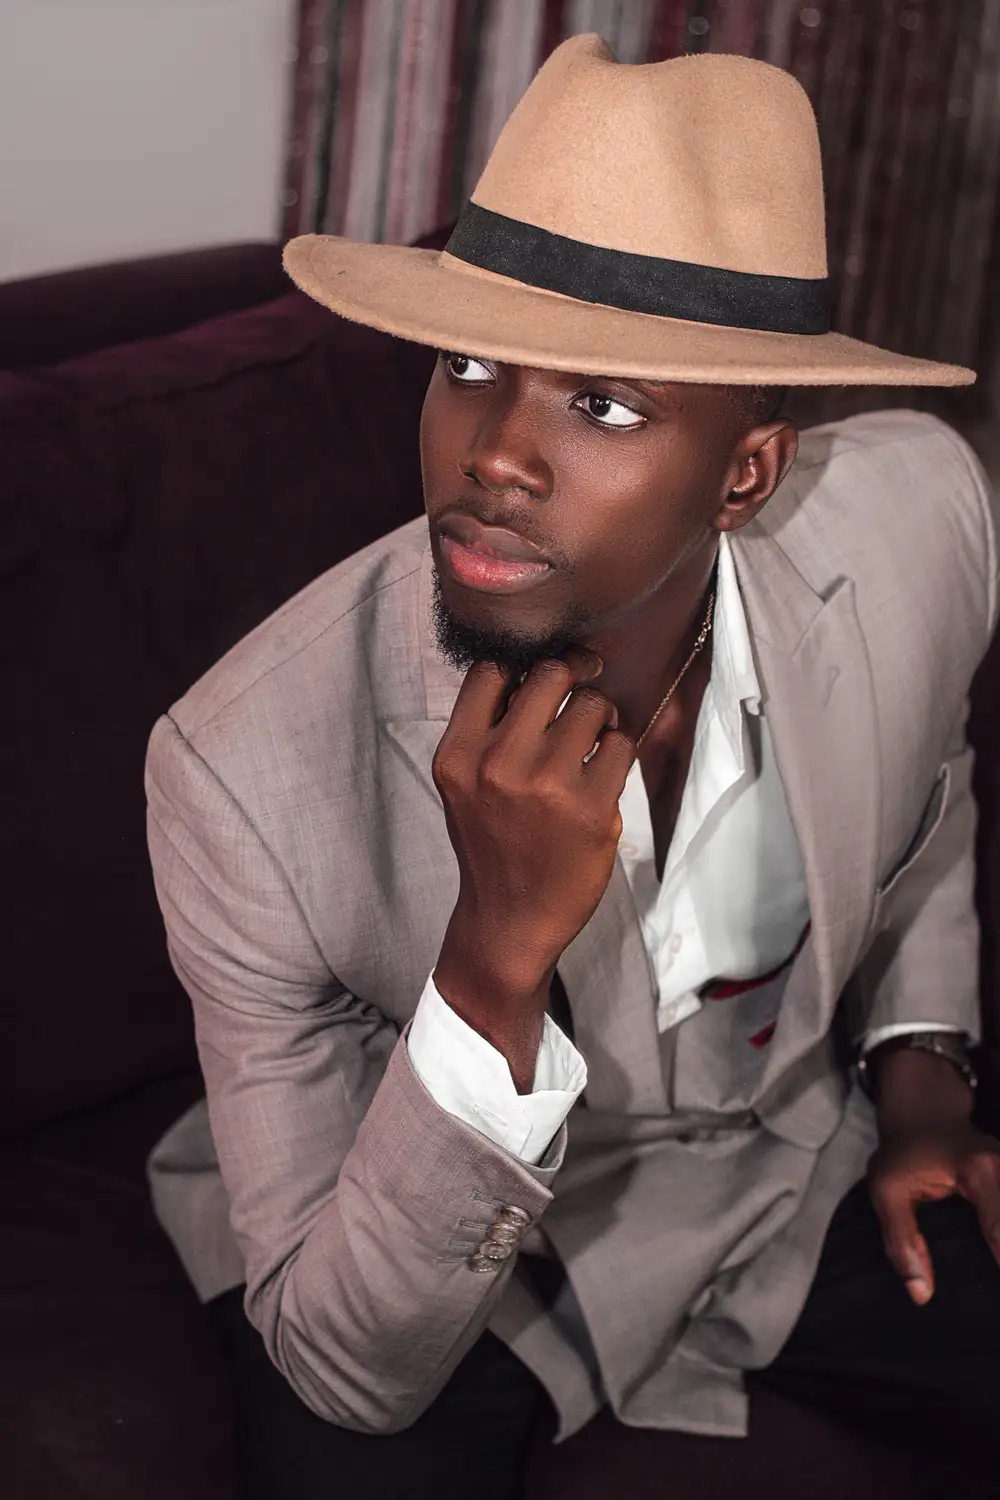 Young man in suit, wearing a hat